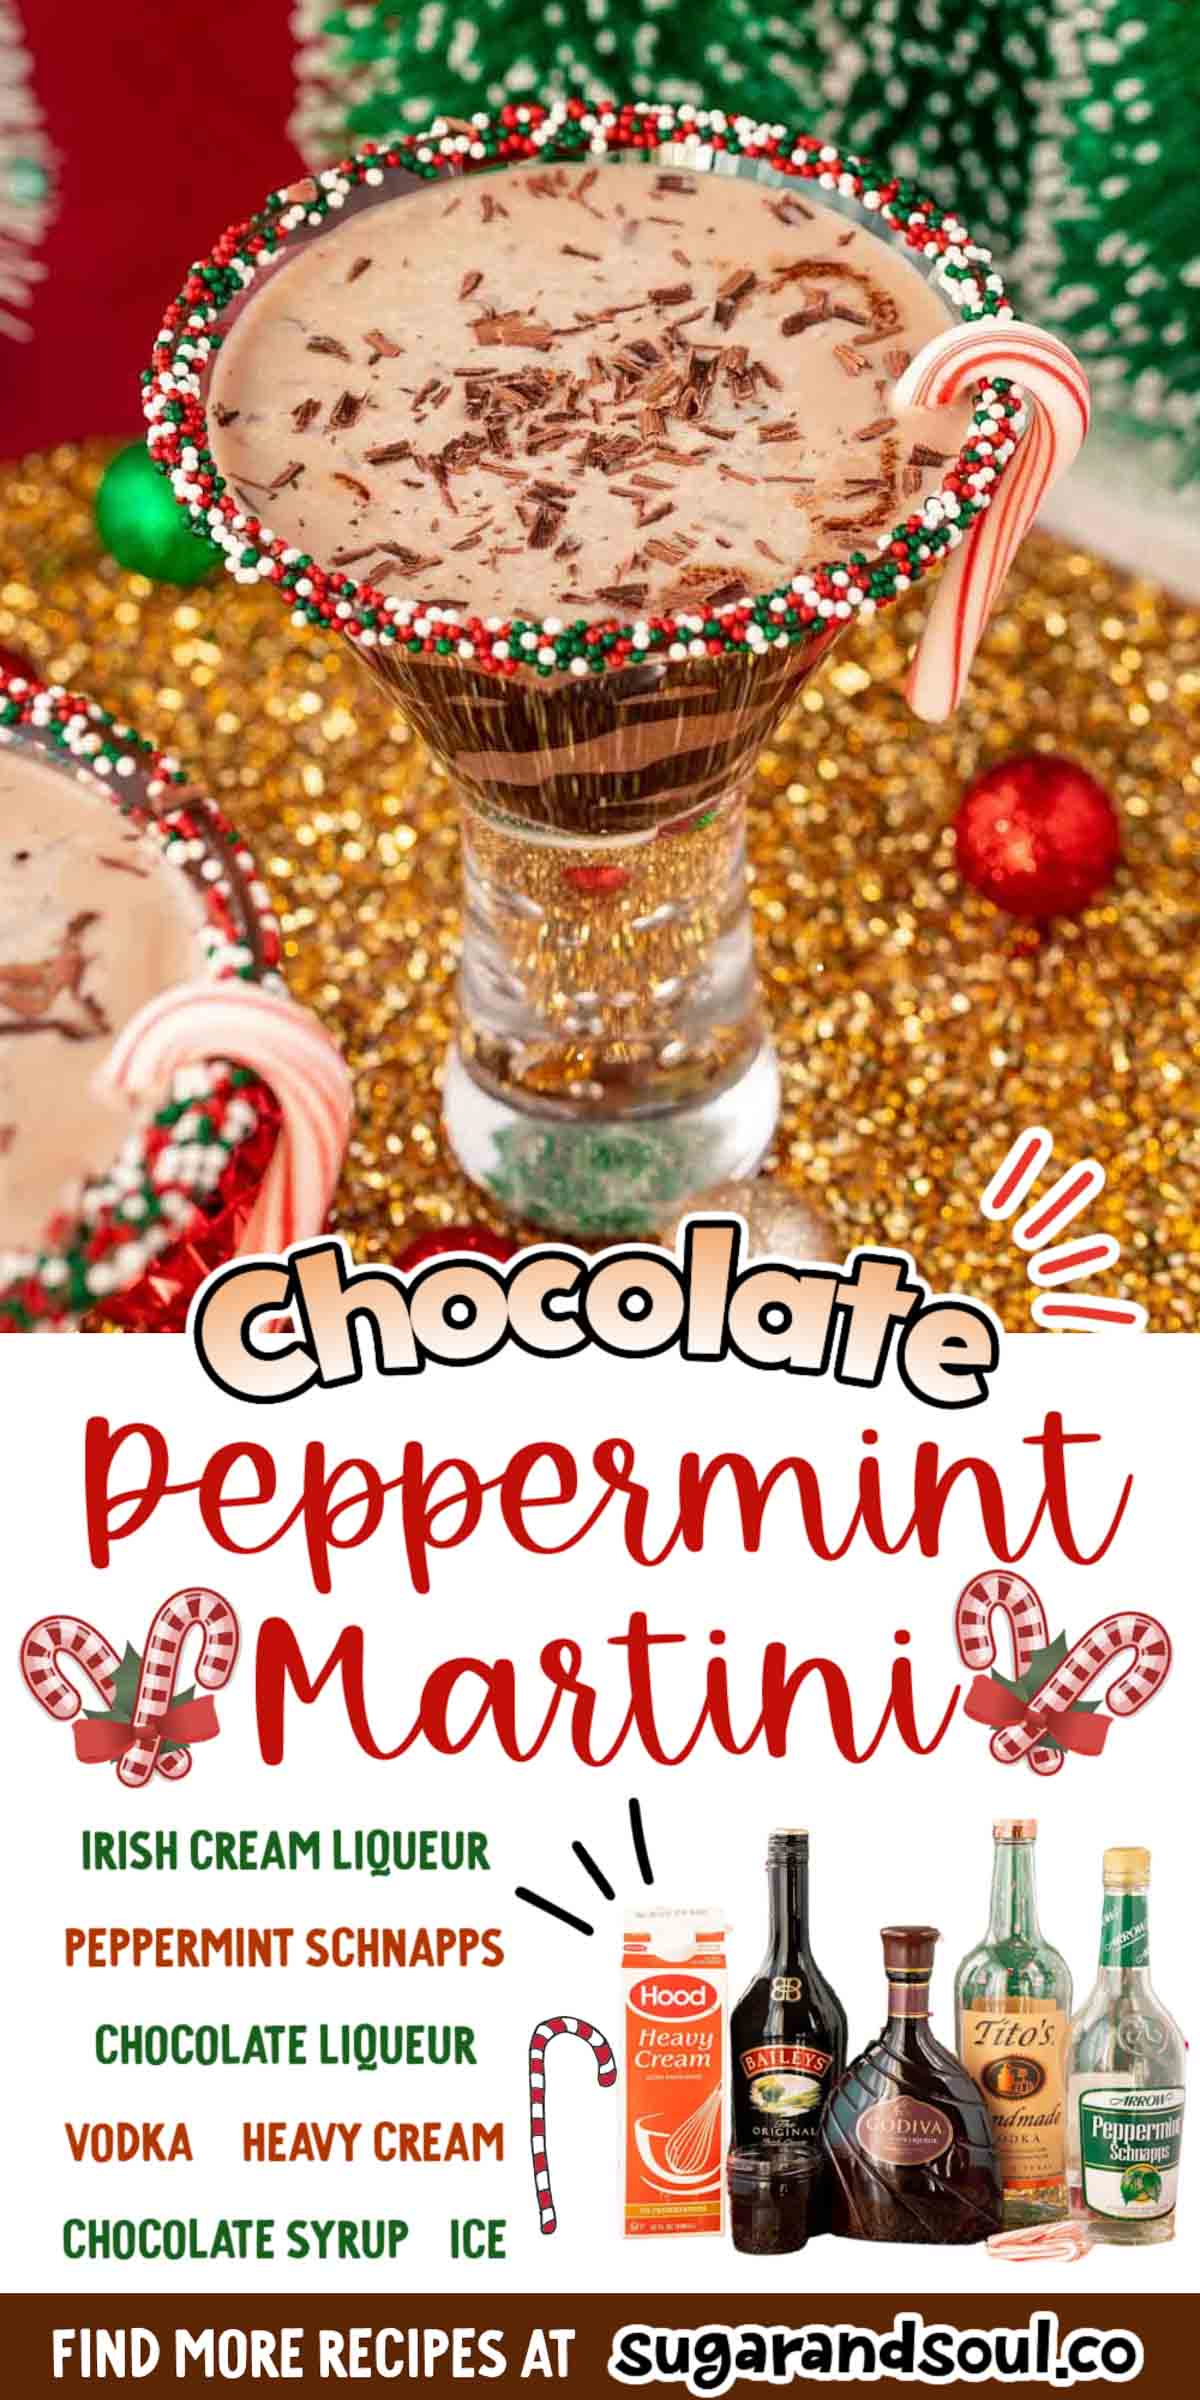 This Chocolate Peppermint Martini is made with 5 ingredients and is served in sprinkle-rimmed martini glasses that are drizzled with chocolate syrup! Takes just 5 minutes to make! via @sugarandsoulco